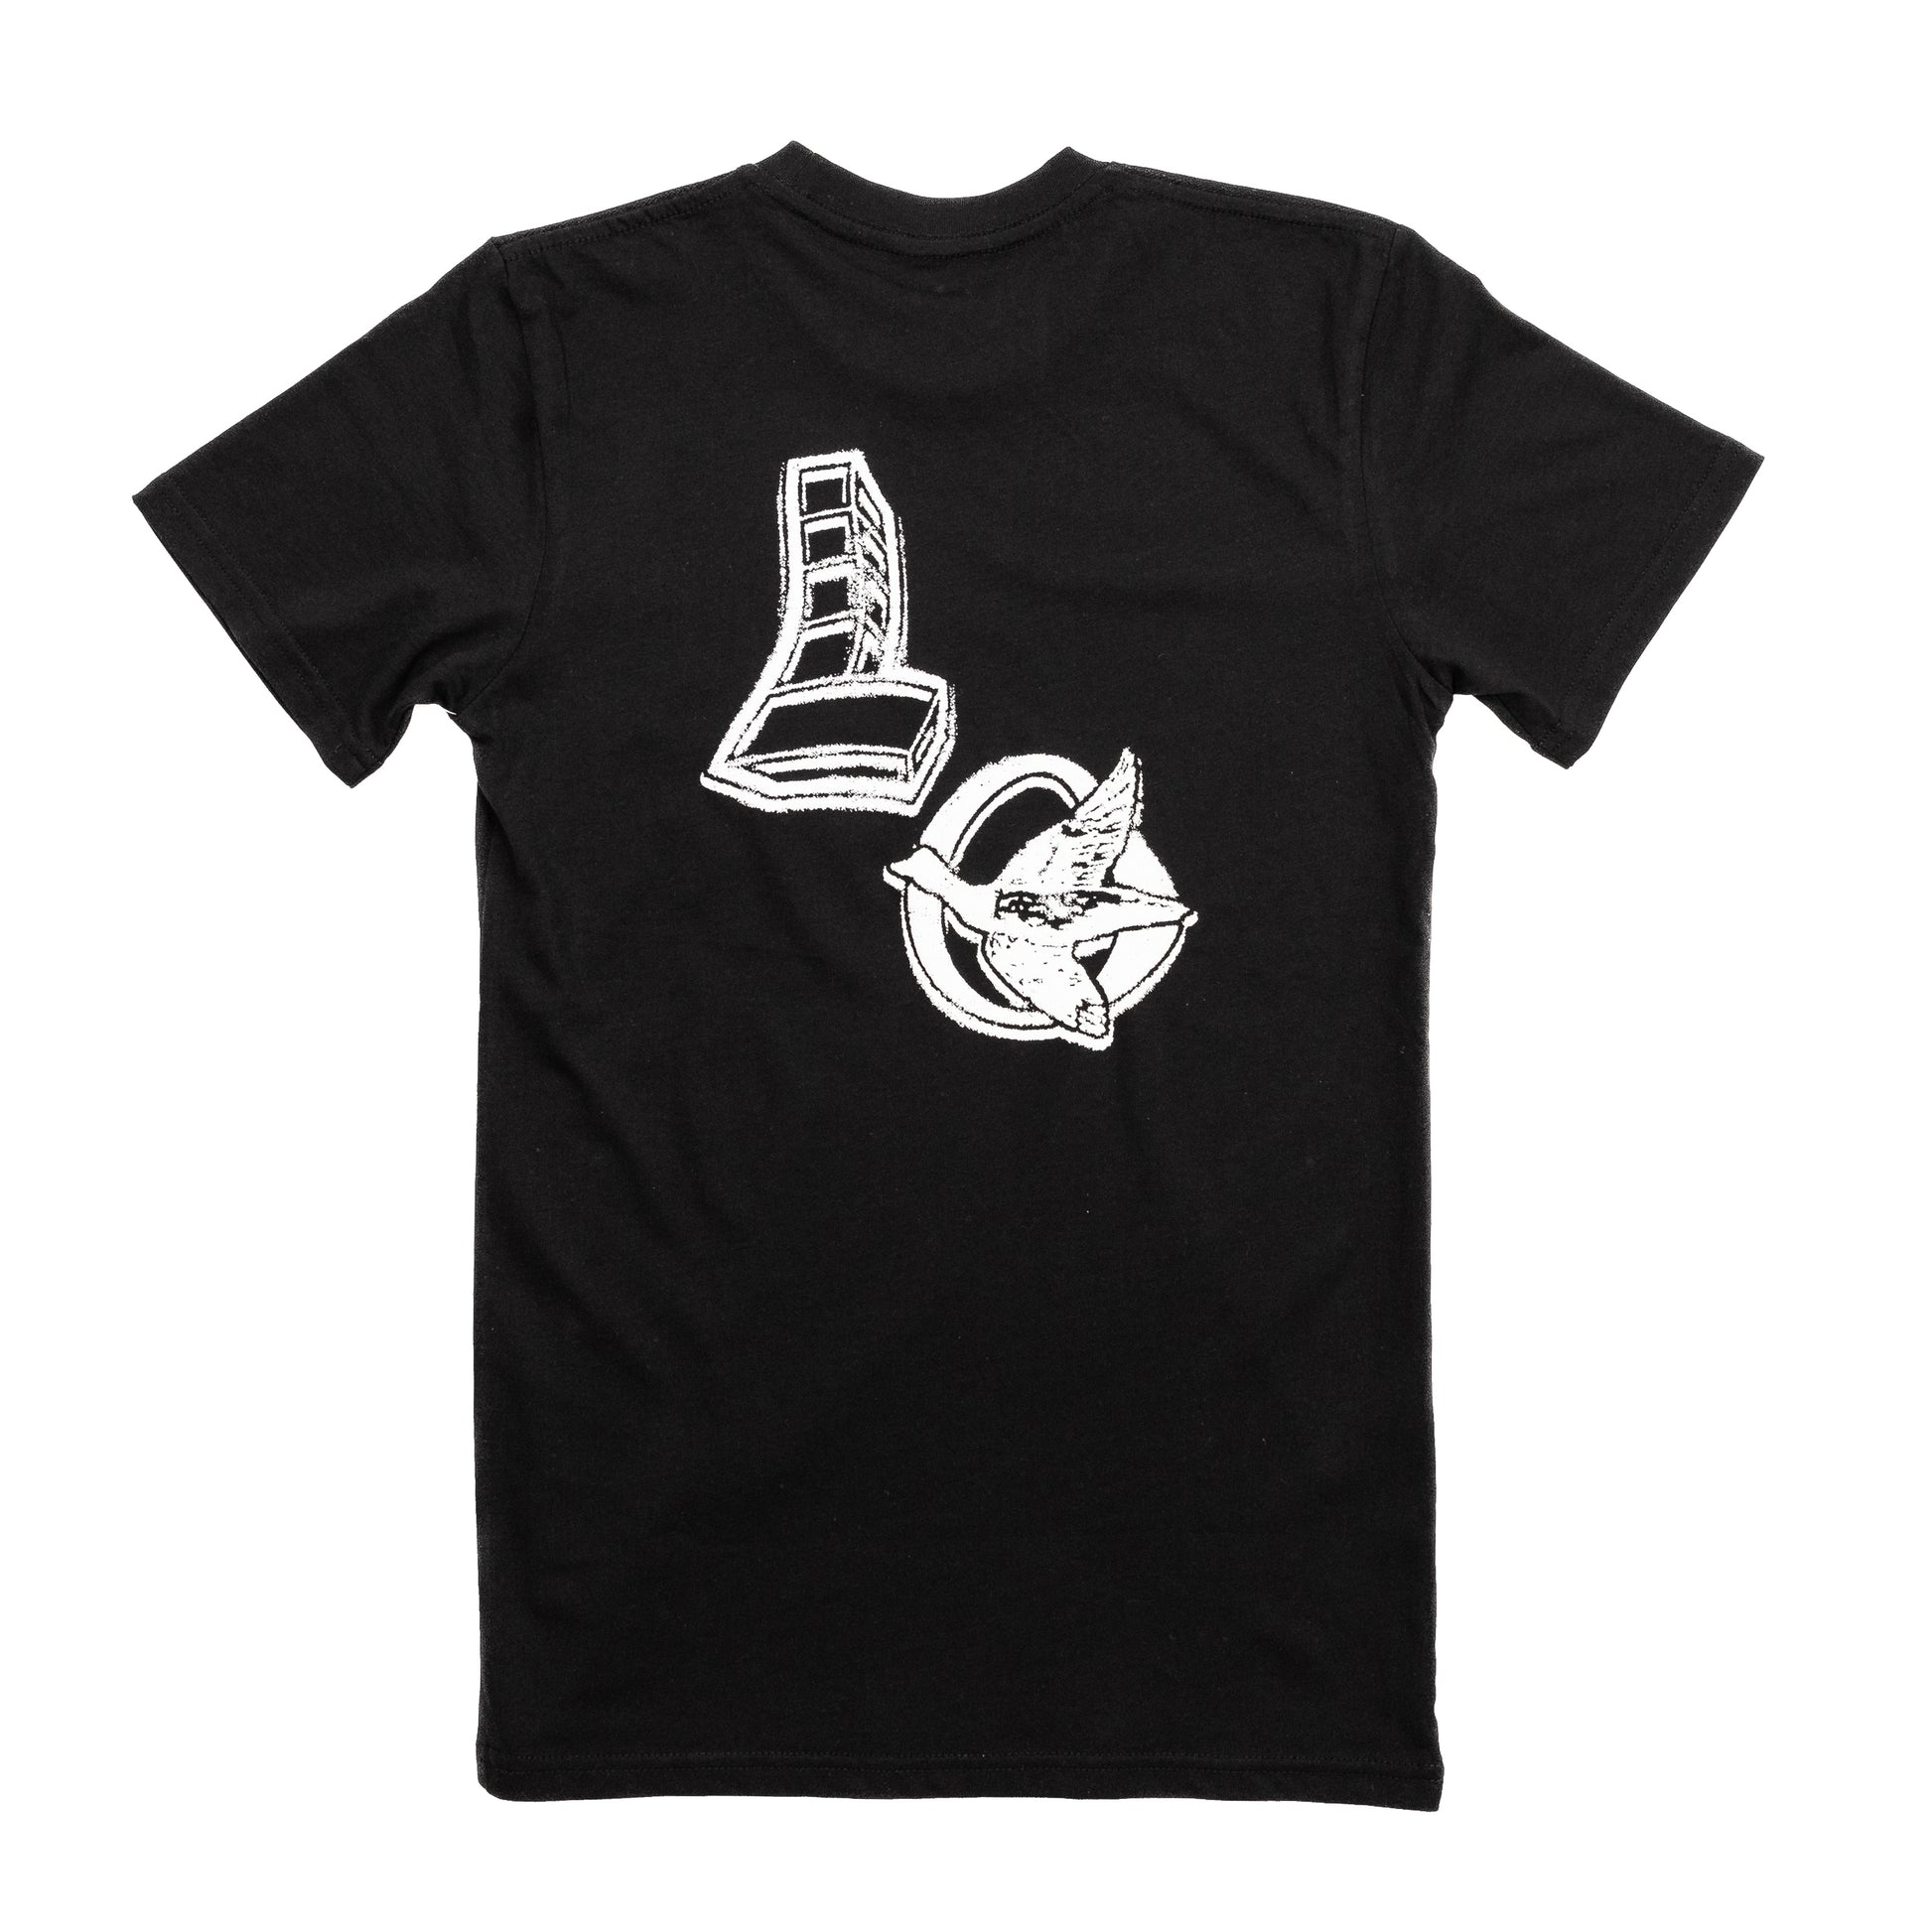 New LO Puff Tee, Black/White - Layr Official